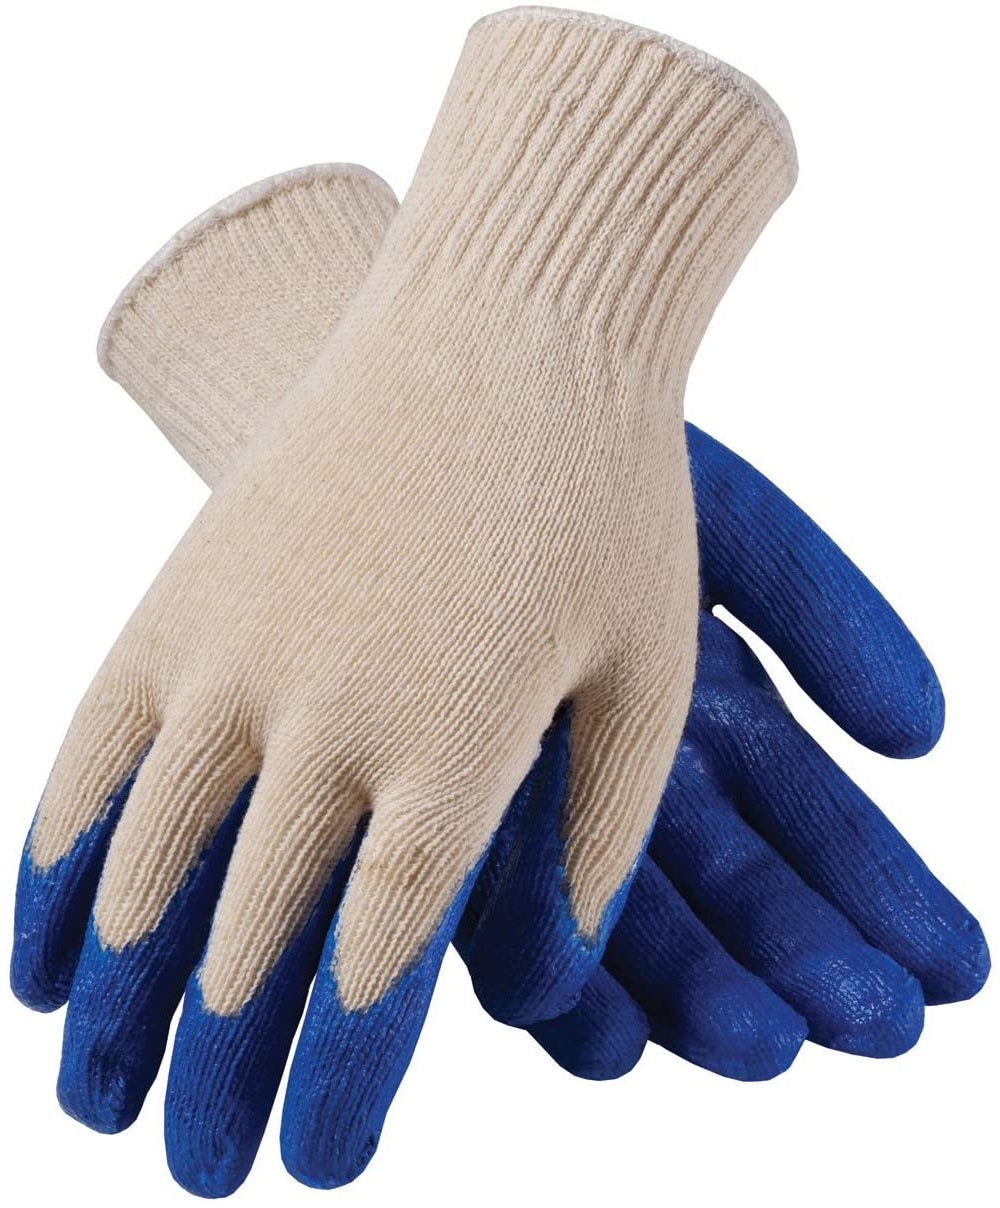 Boss 39-C122/L General Purpose Palm Coated Gloves, Large